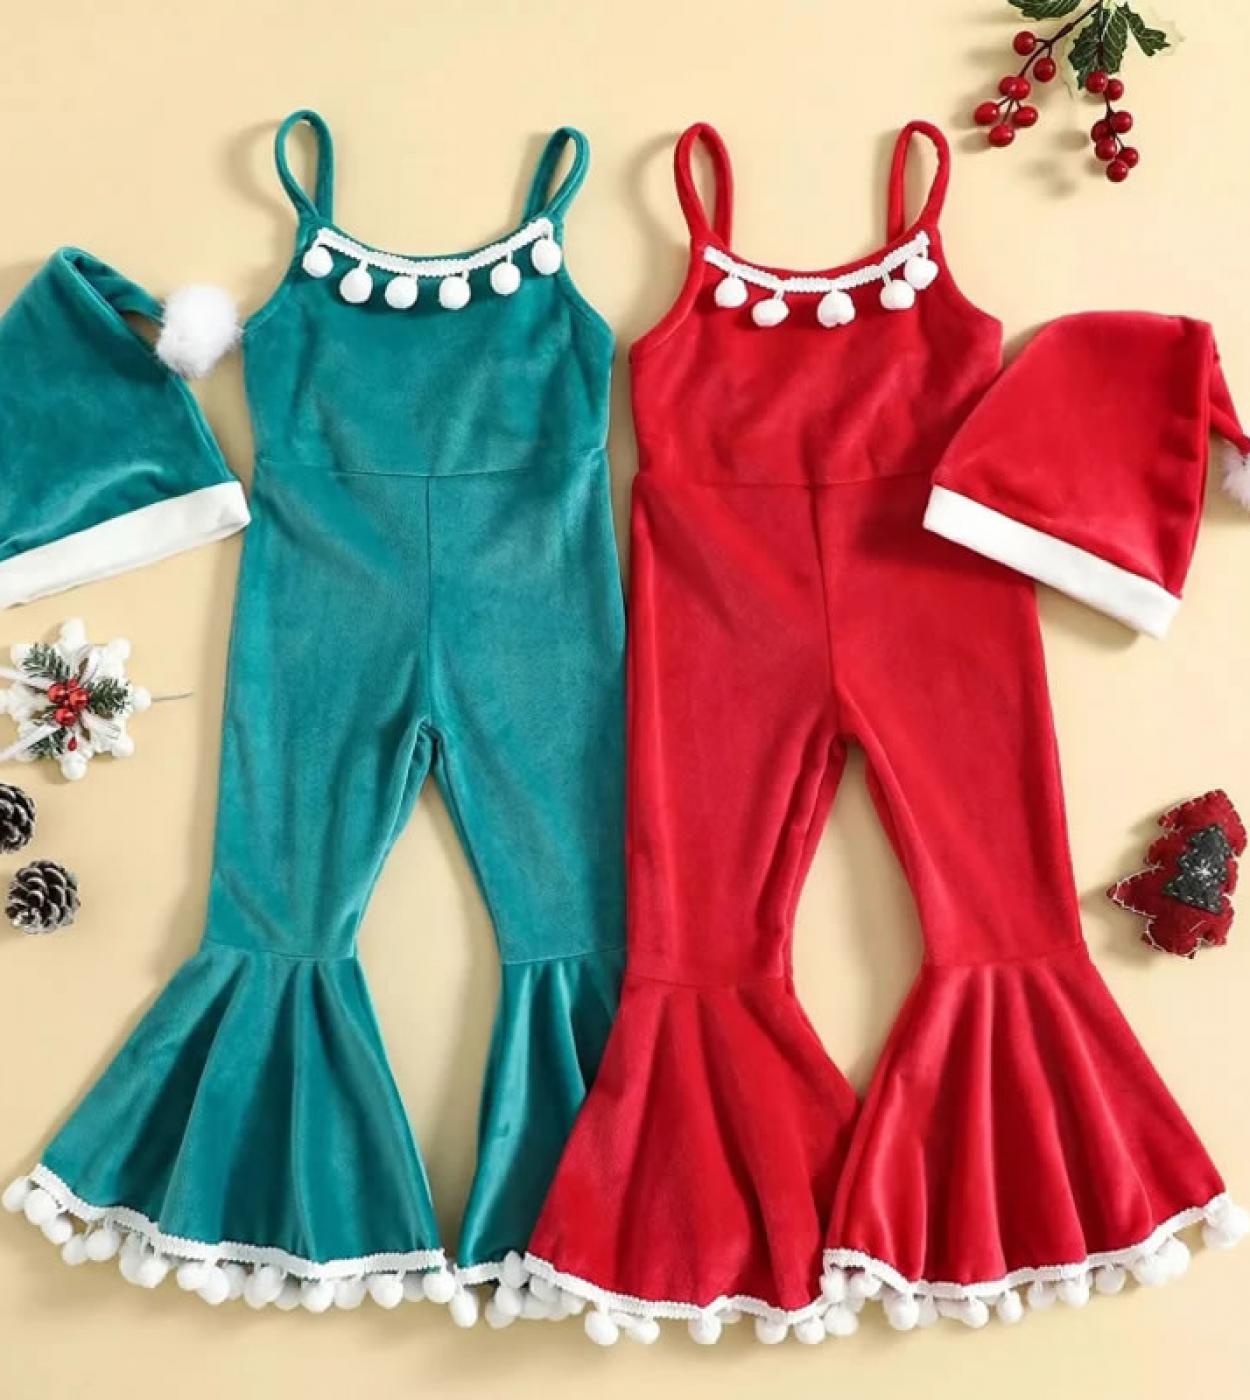 Christmas Jumpsuit For Baby Girl One Piece Clothes Xmas Kid Cute Ball Sling Pant Romperhat 2pc Set 2 6 Year